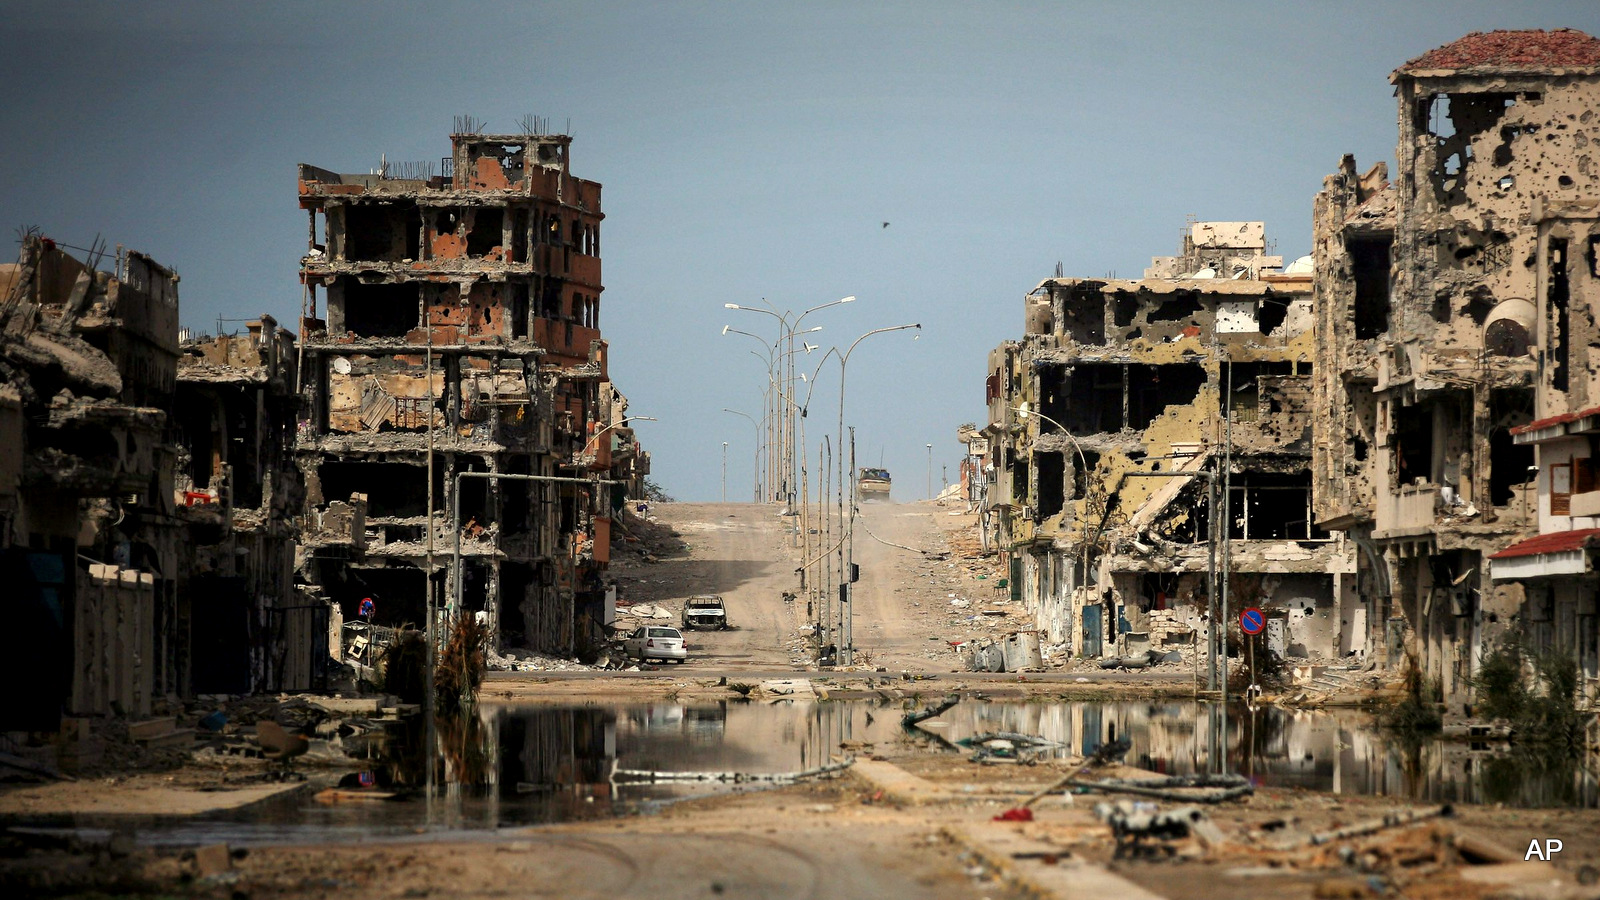 A photo from 2011 shows buildings ravaged by fighting in Sirte, Libya. Islamic State militants have controlled the city since August 2015. The U.S. military has announced ongoing airstrikes against targets in Sirte.